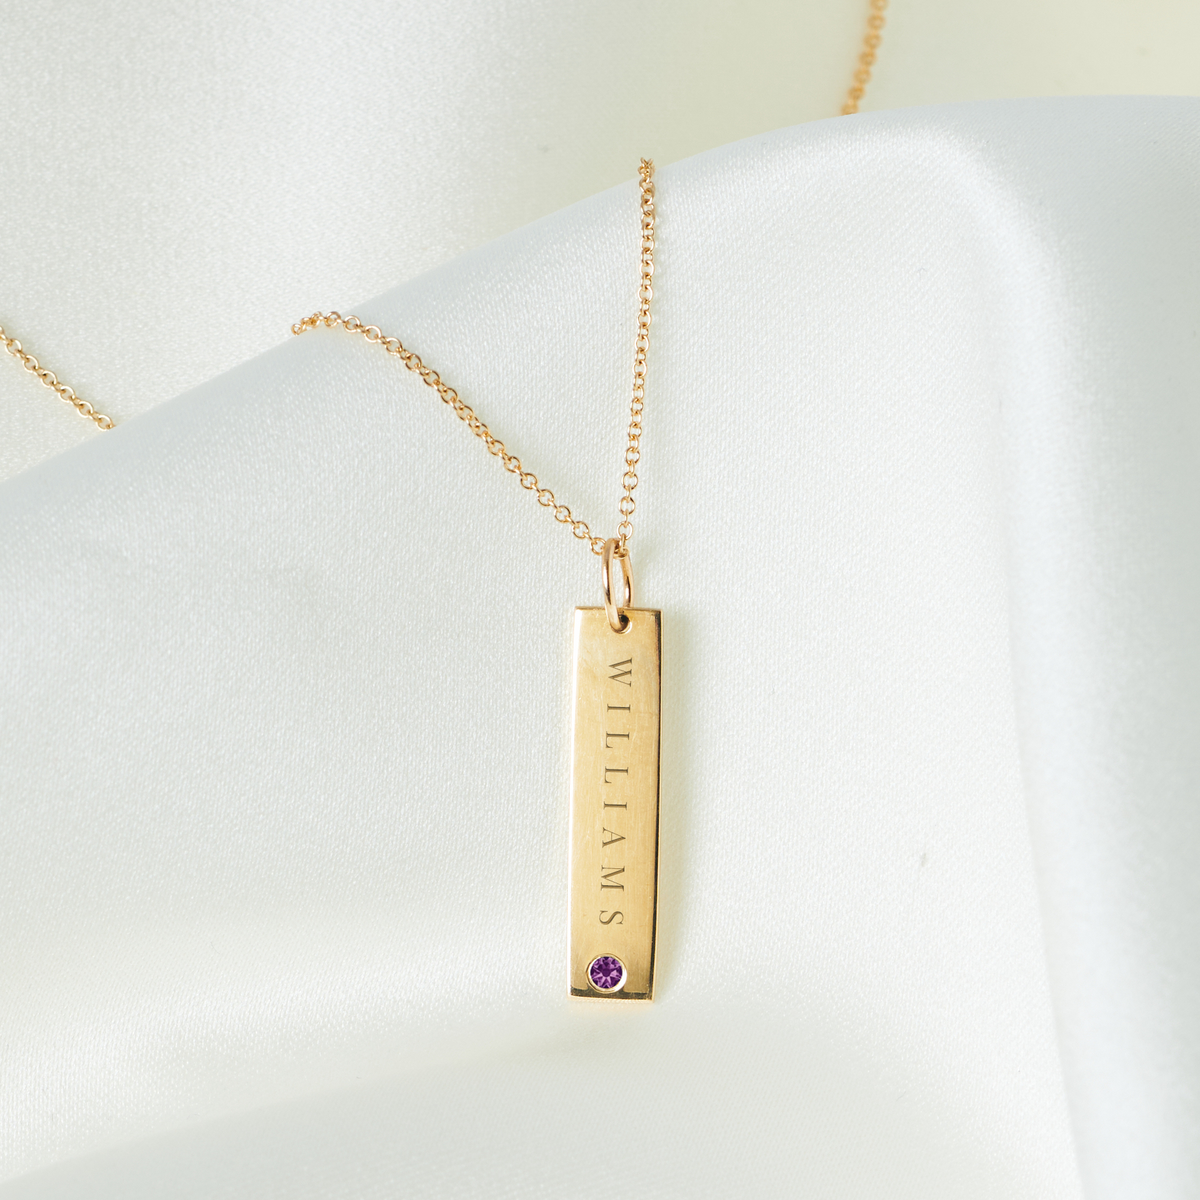 Williams Amethyst Gemstone Bar laydown shown in gold on cable chain